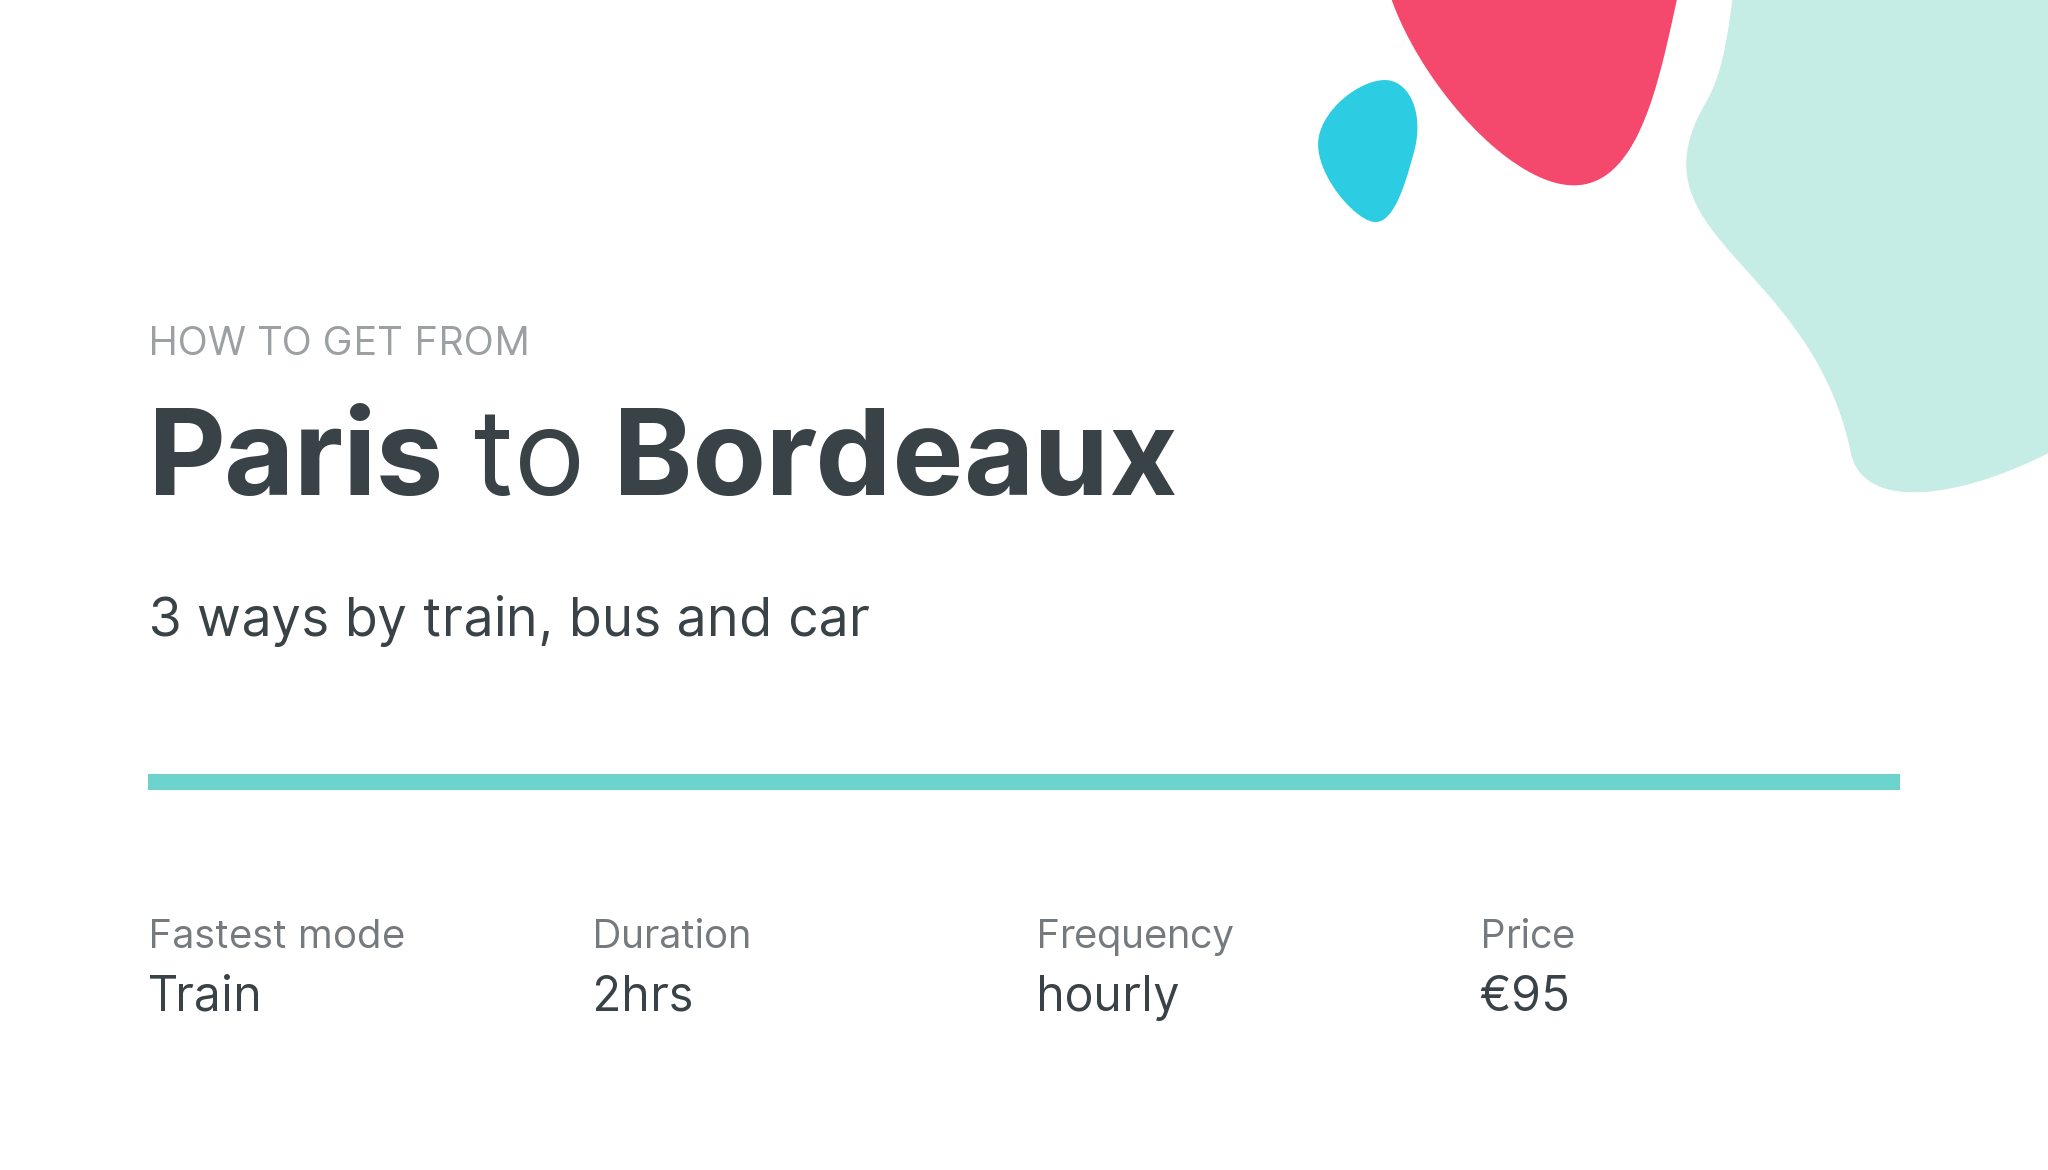 How do I get from Paris to Bordeaux